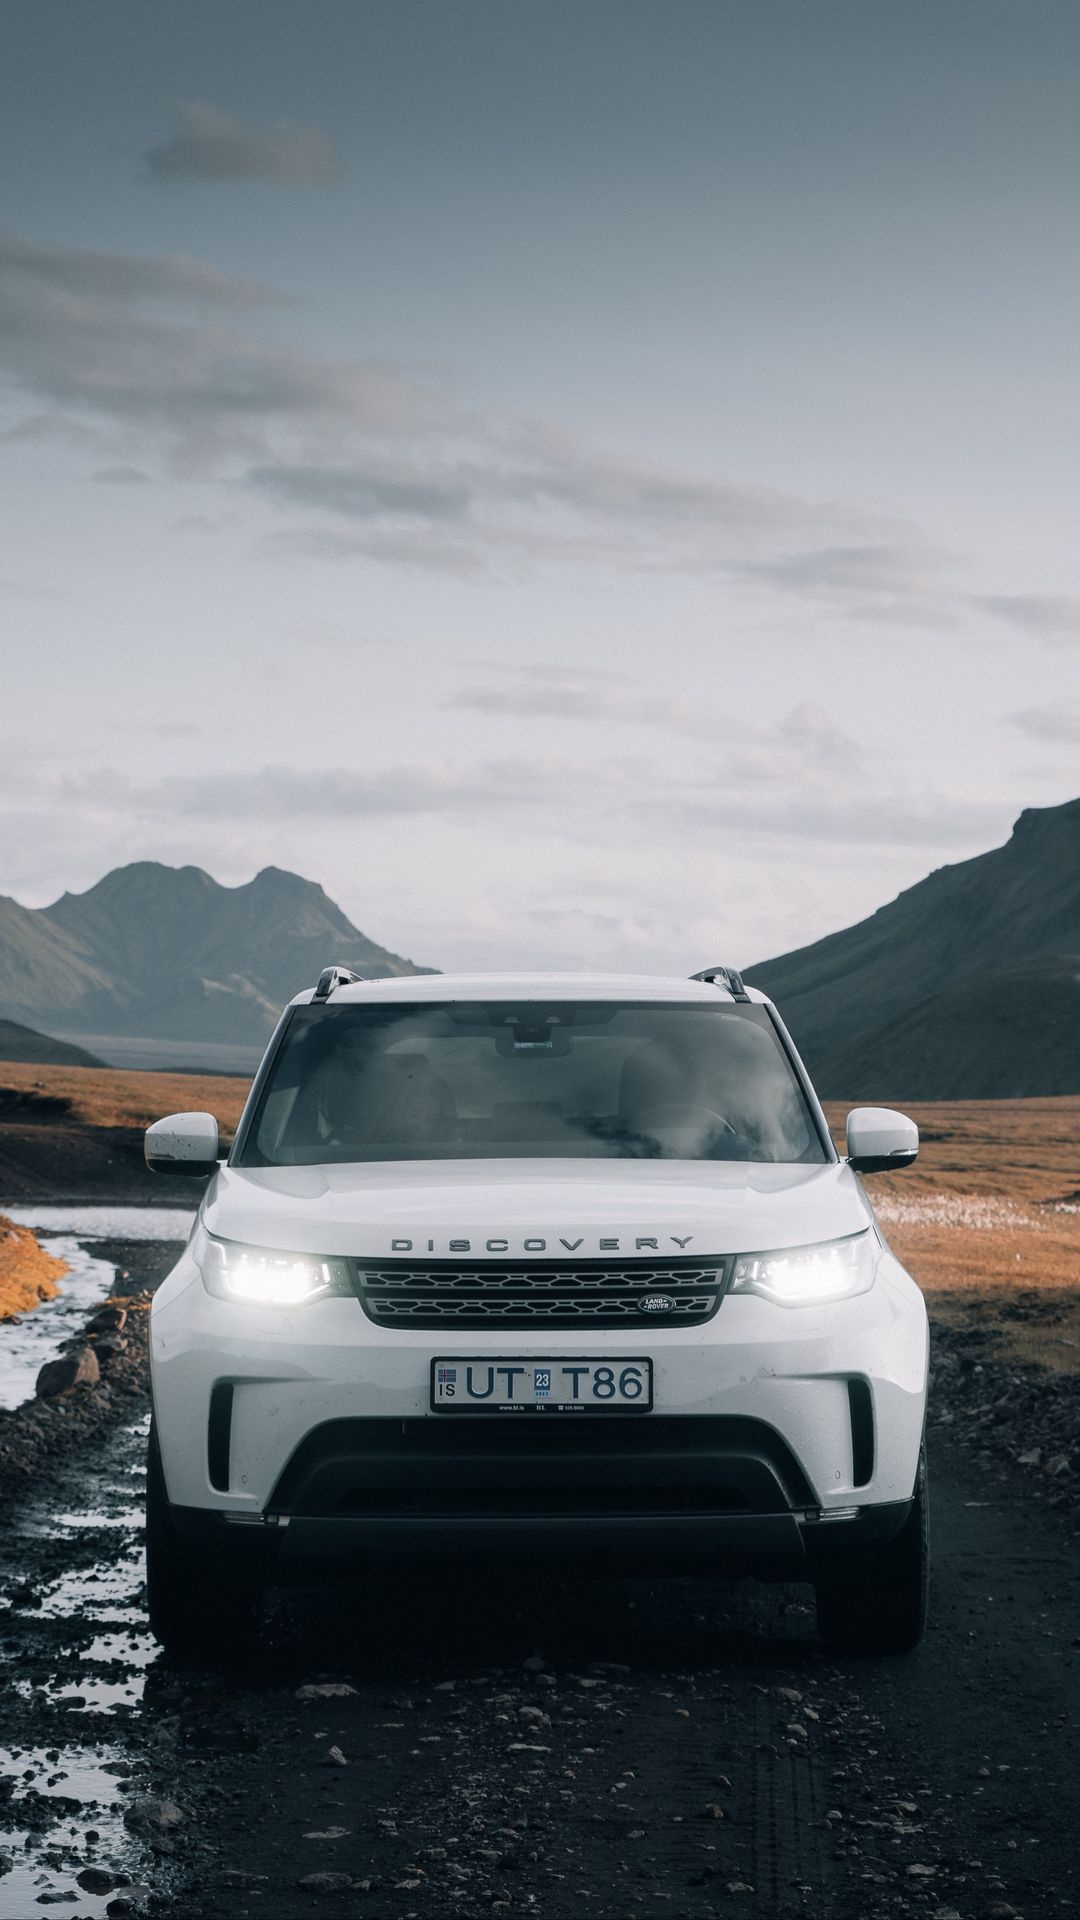 Land Rover Discovery, Captivating 4K HD wallpapers, Adventure at your fingertips, 1080x1920 Full HD Phone